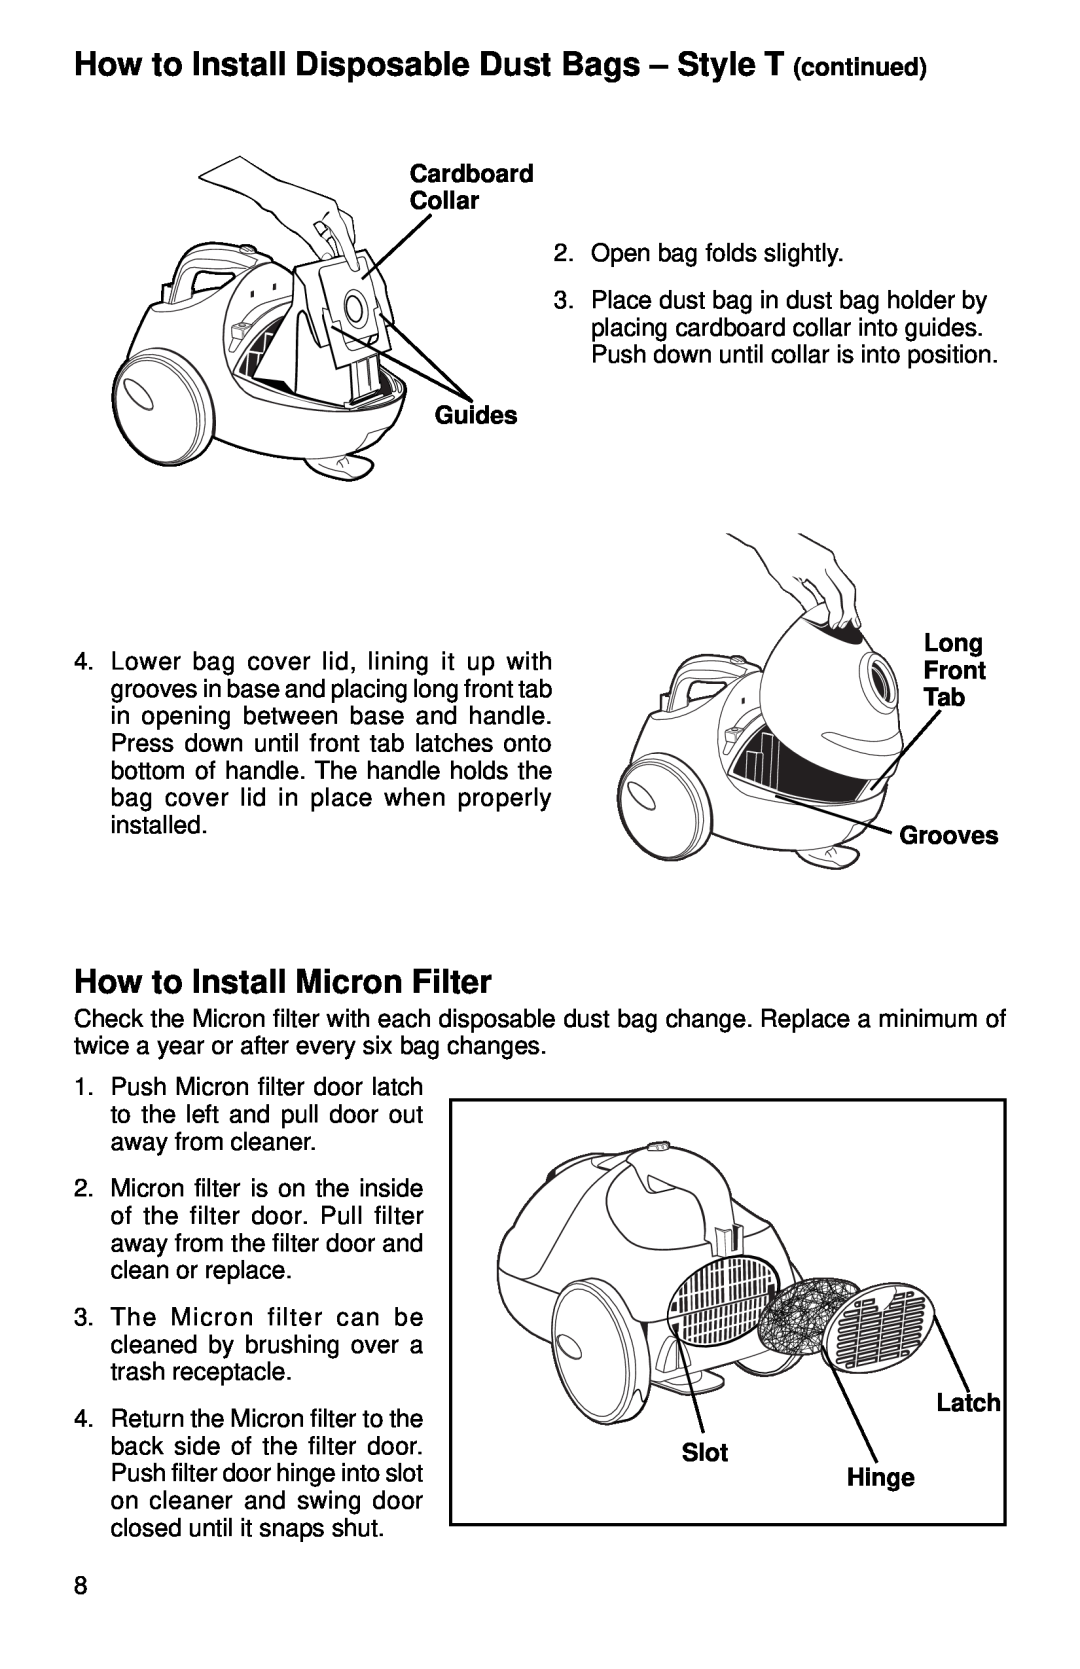 Eureka 965 How to Install Disposable Dust Bags - Style Tcontinued, How to Install Micron Filter, Cardboard Collar, Guides 